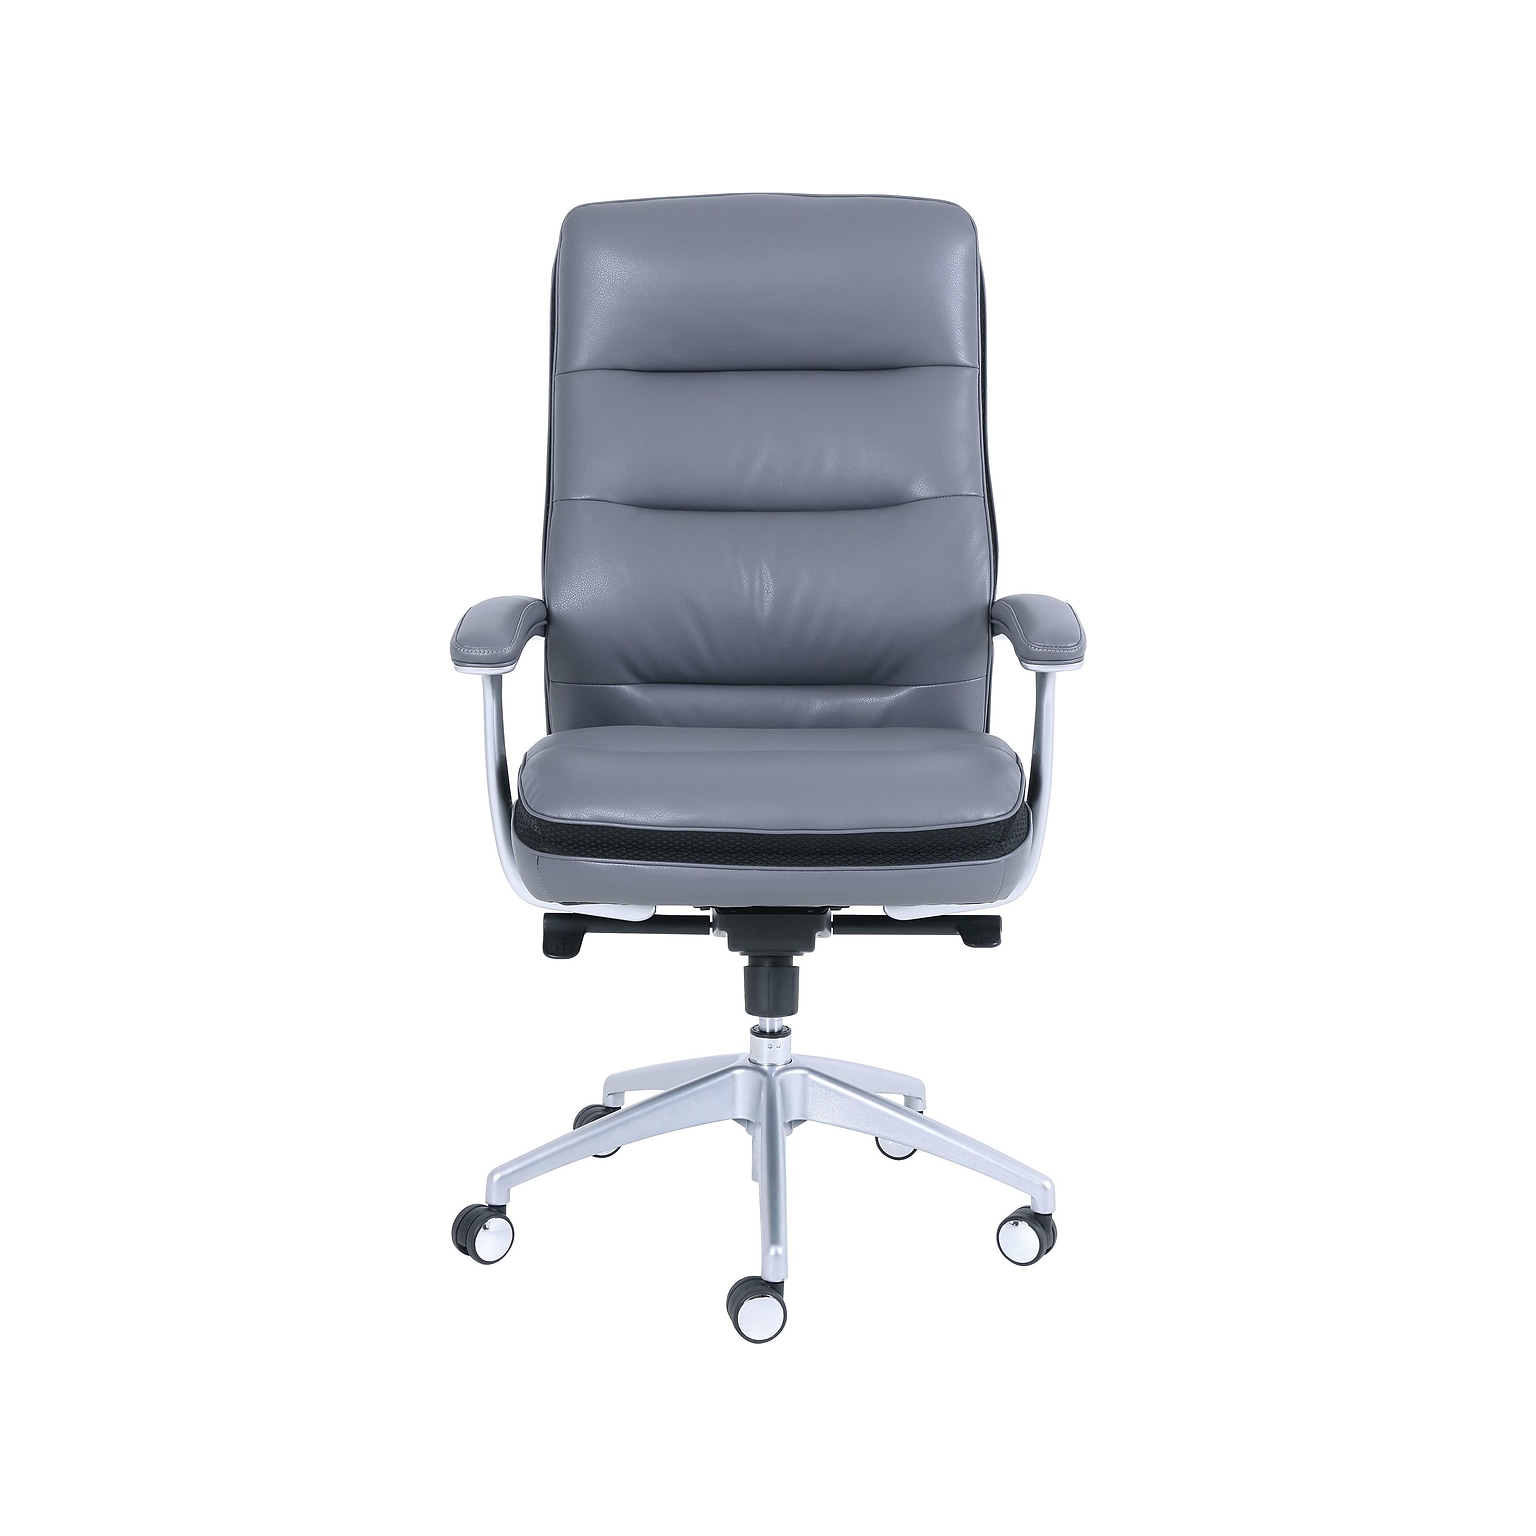 Beautyrest Platinum Sofil Bonded Leather Executive Chair, Gray (49404)